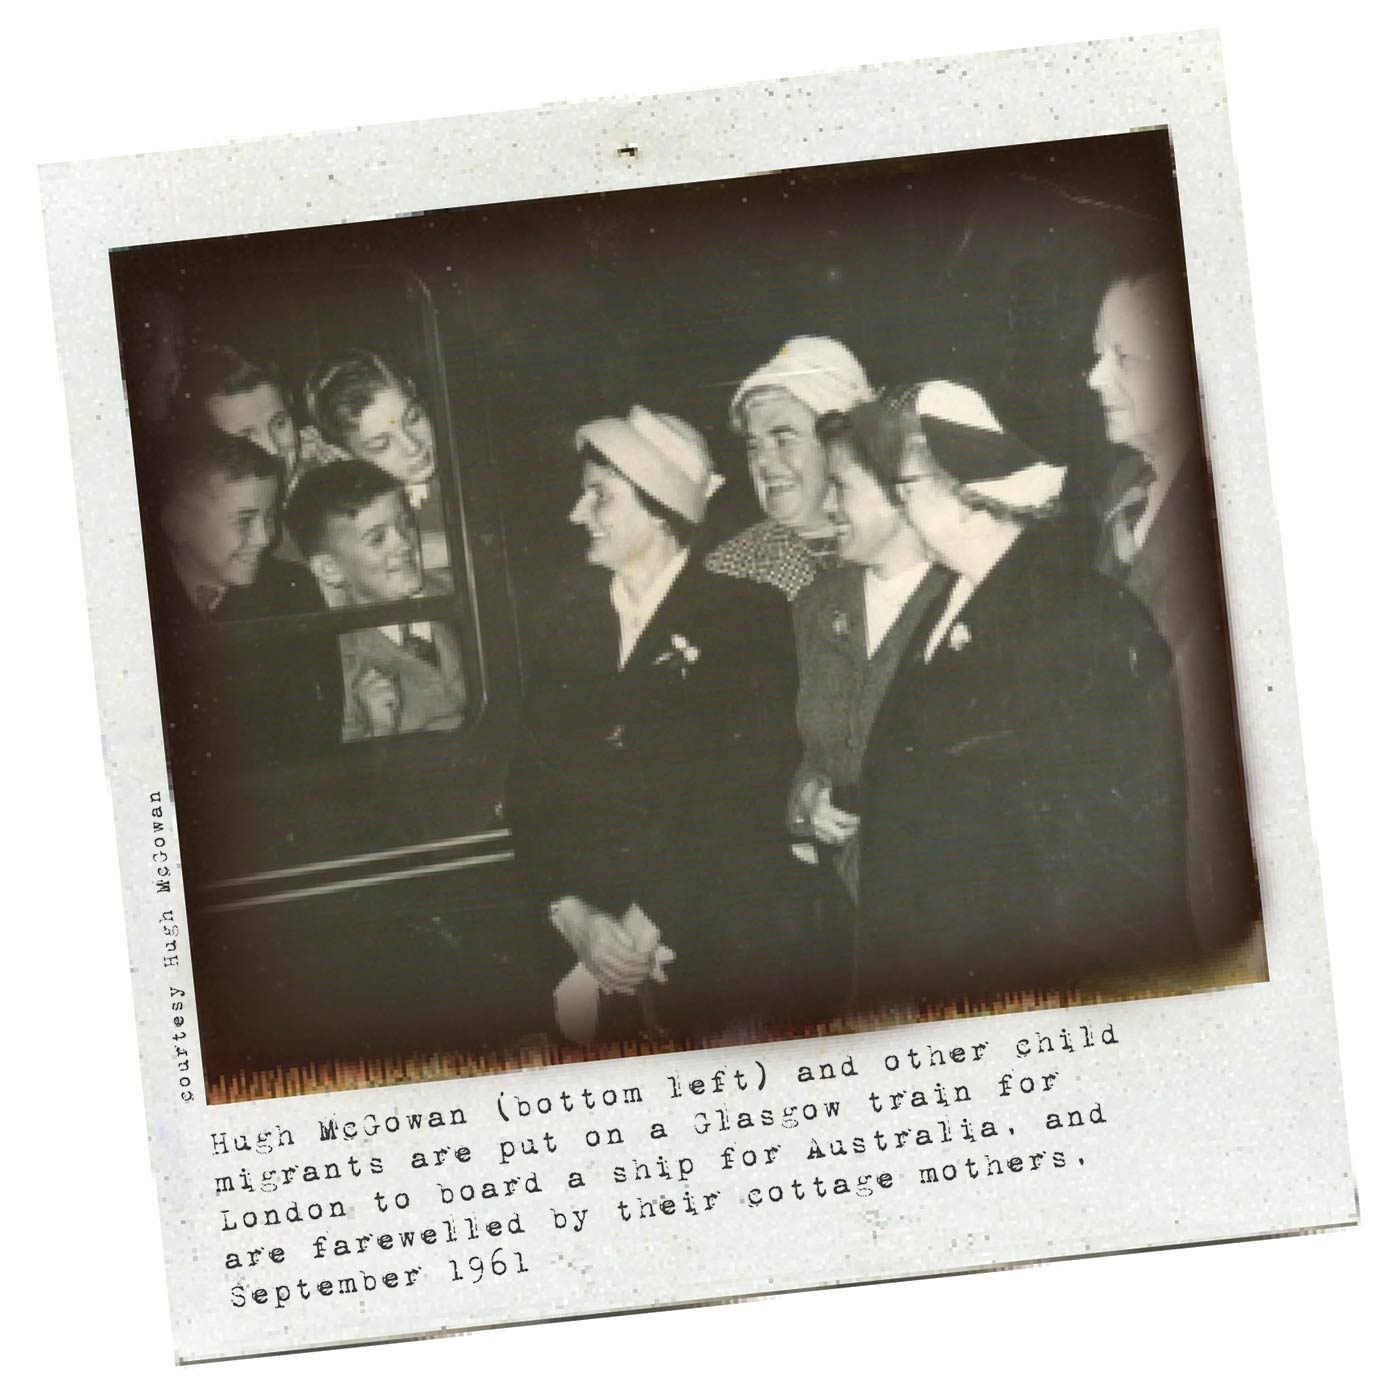 Black and white photo of a group of adults farewelling children as they catch a train. Typewritten text underneath reads: 'Hugh McGowan (bottom left) and other child migrants are put on a Glasgow train for London to board a ship for Australia, and are farewelled by their cottage mothers. September 1961'. In smaller text, on the left-hand side of the image, in a vertical direction, reads 'Courtesy Hugh McGowan'.  - click to view larger image